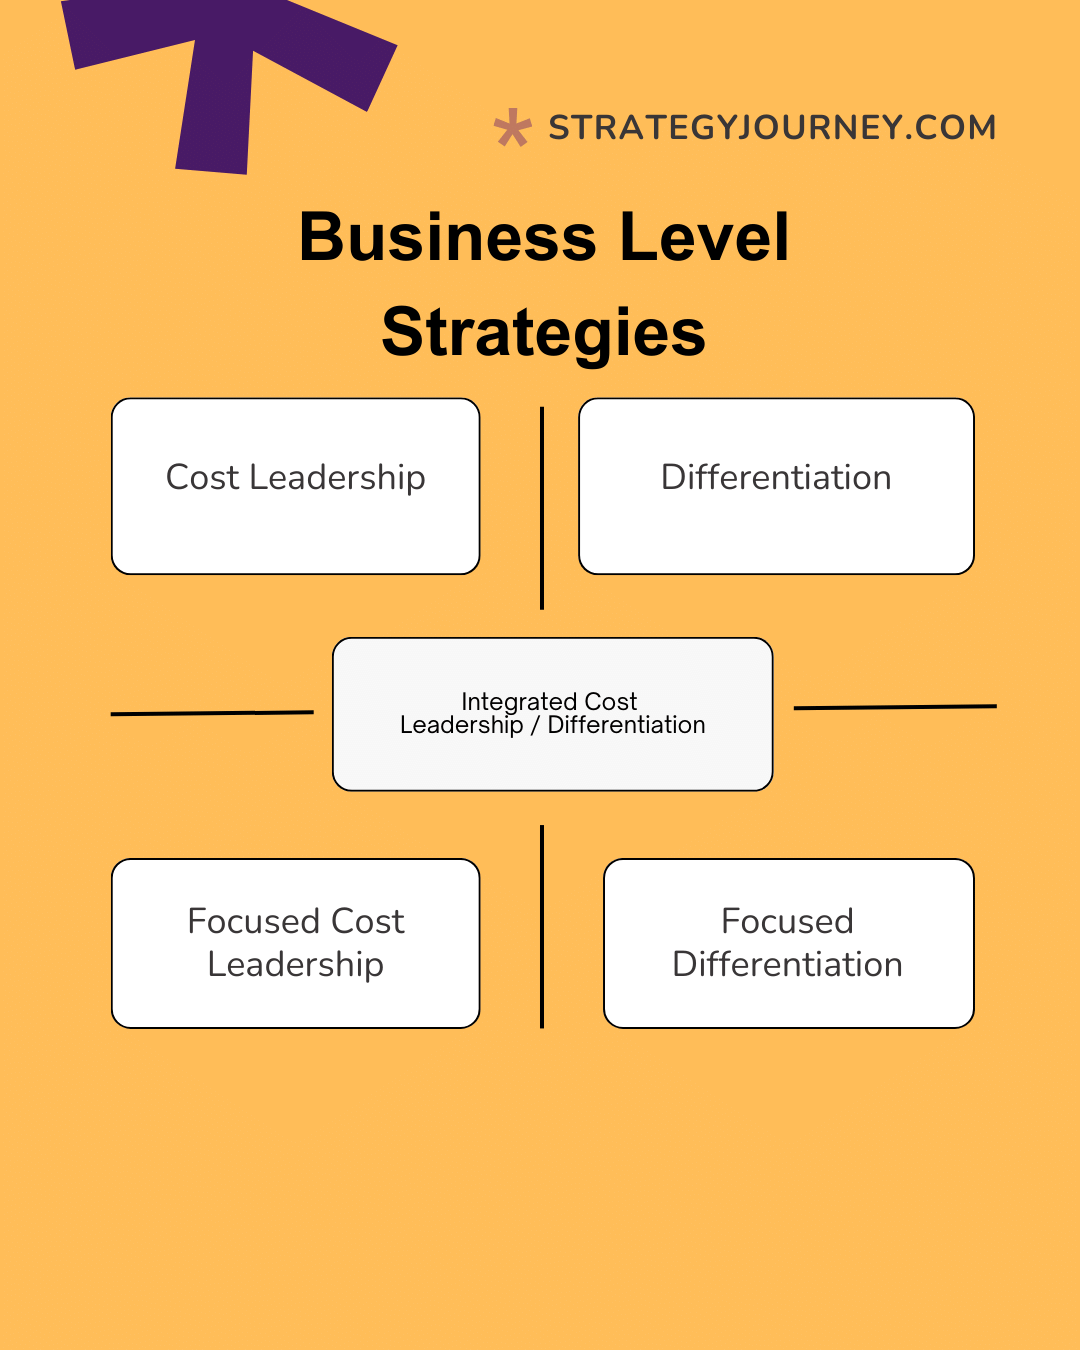 Business level strategies with 5 different levels showing the differences between cost leadership, differentiation, integrated cost leadership / differentiation, focused cost leadership and focused differentiation